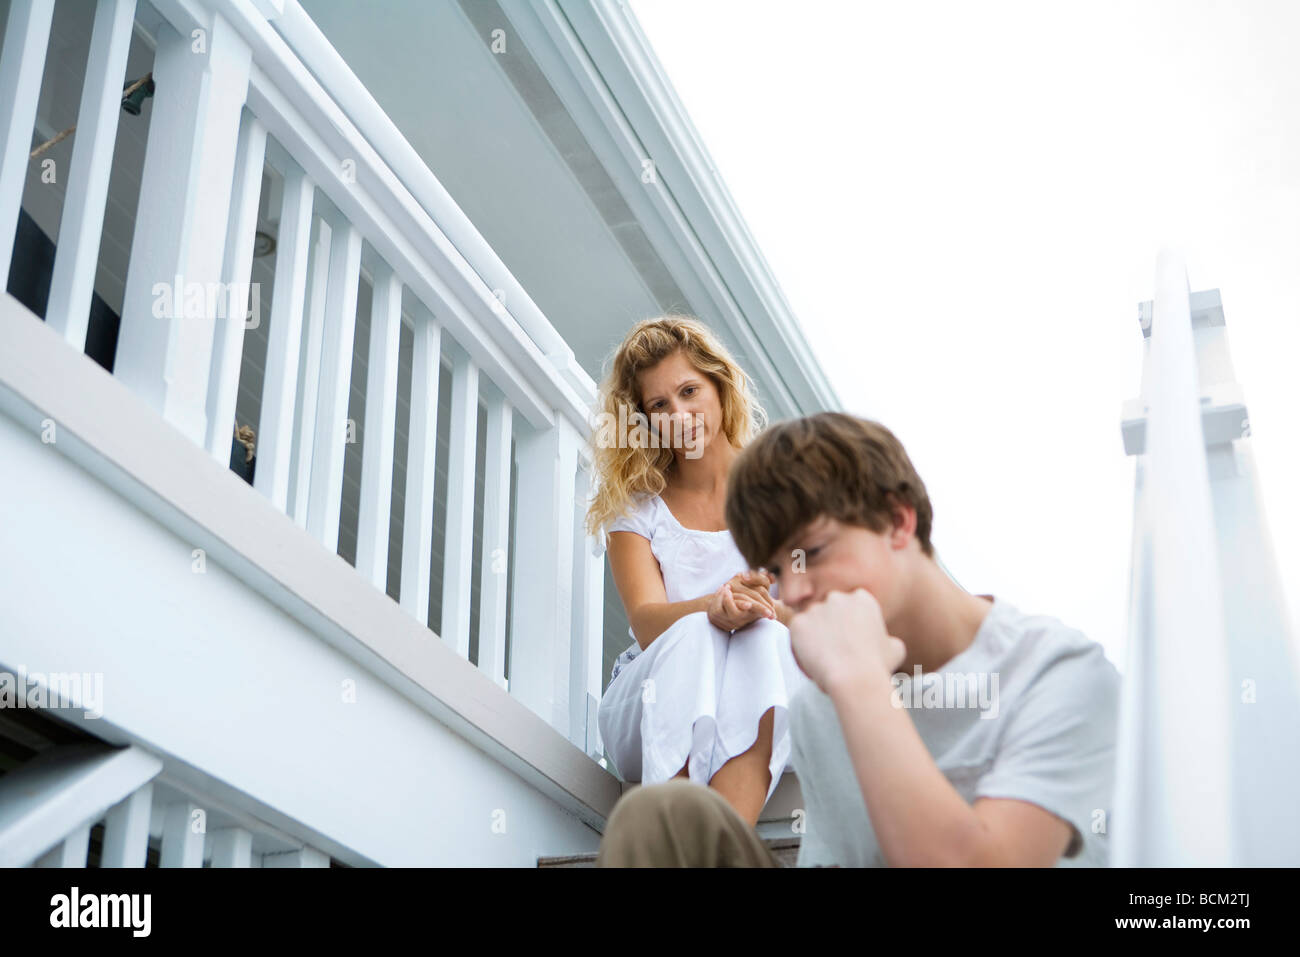 Mother and teenage son sitting on steps, son sulking Stock Photo